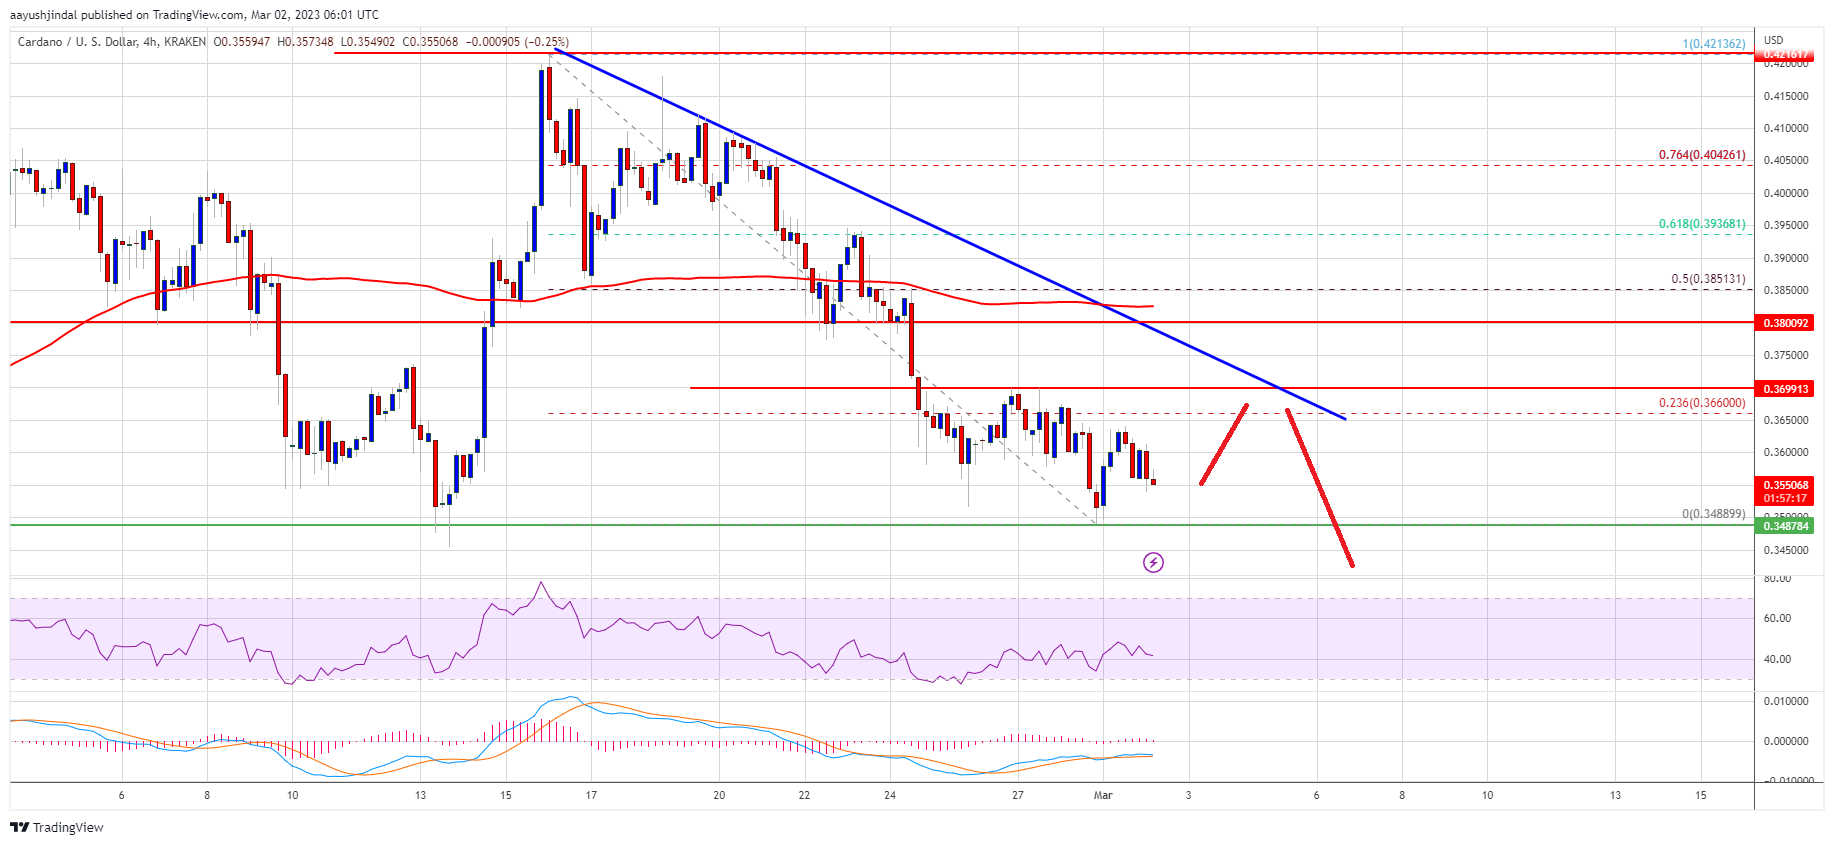 Cardano (ADA) Price Revisits Key Support, Can Bulls Save The Day?